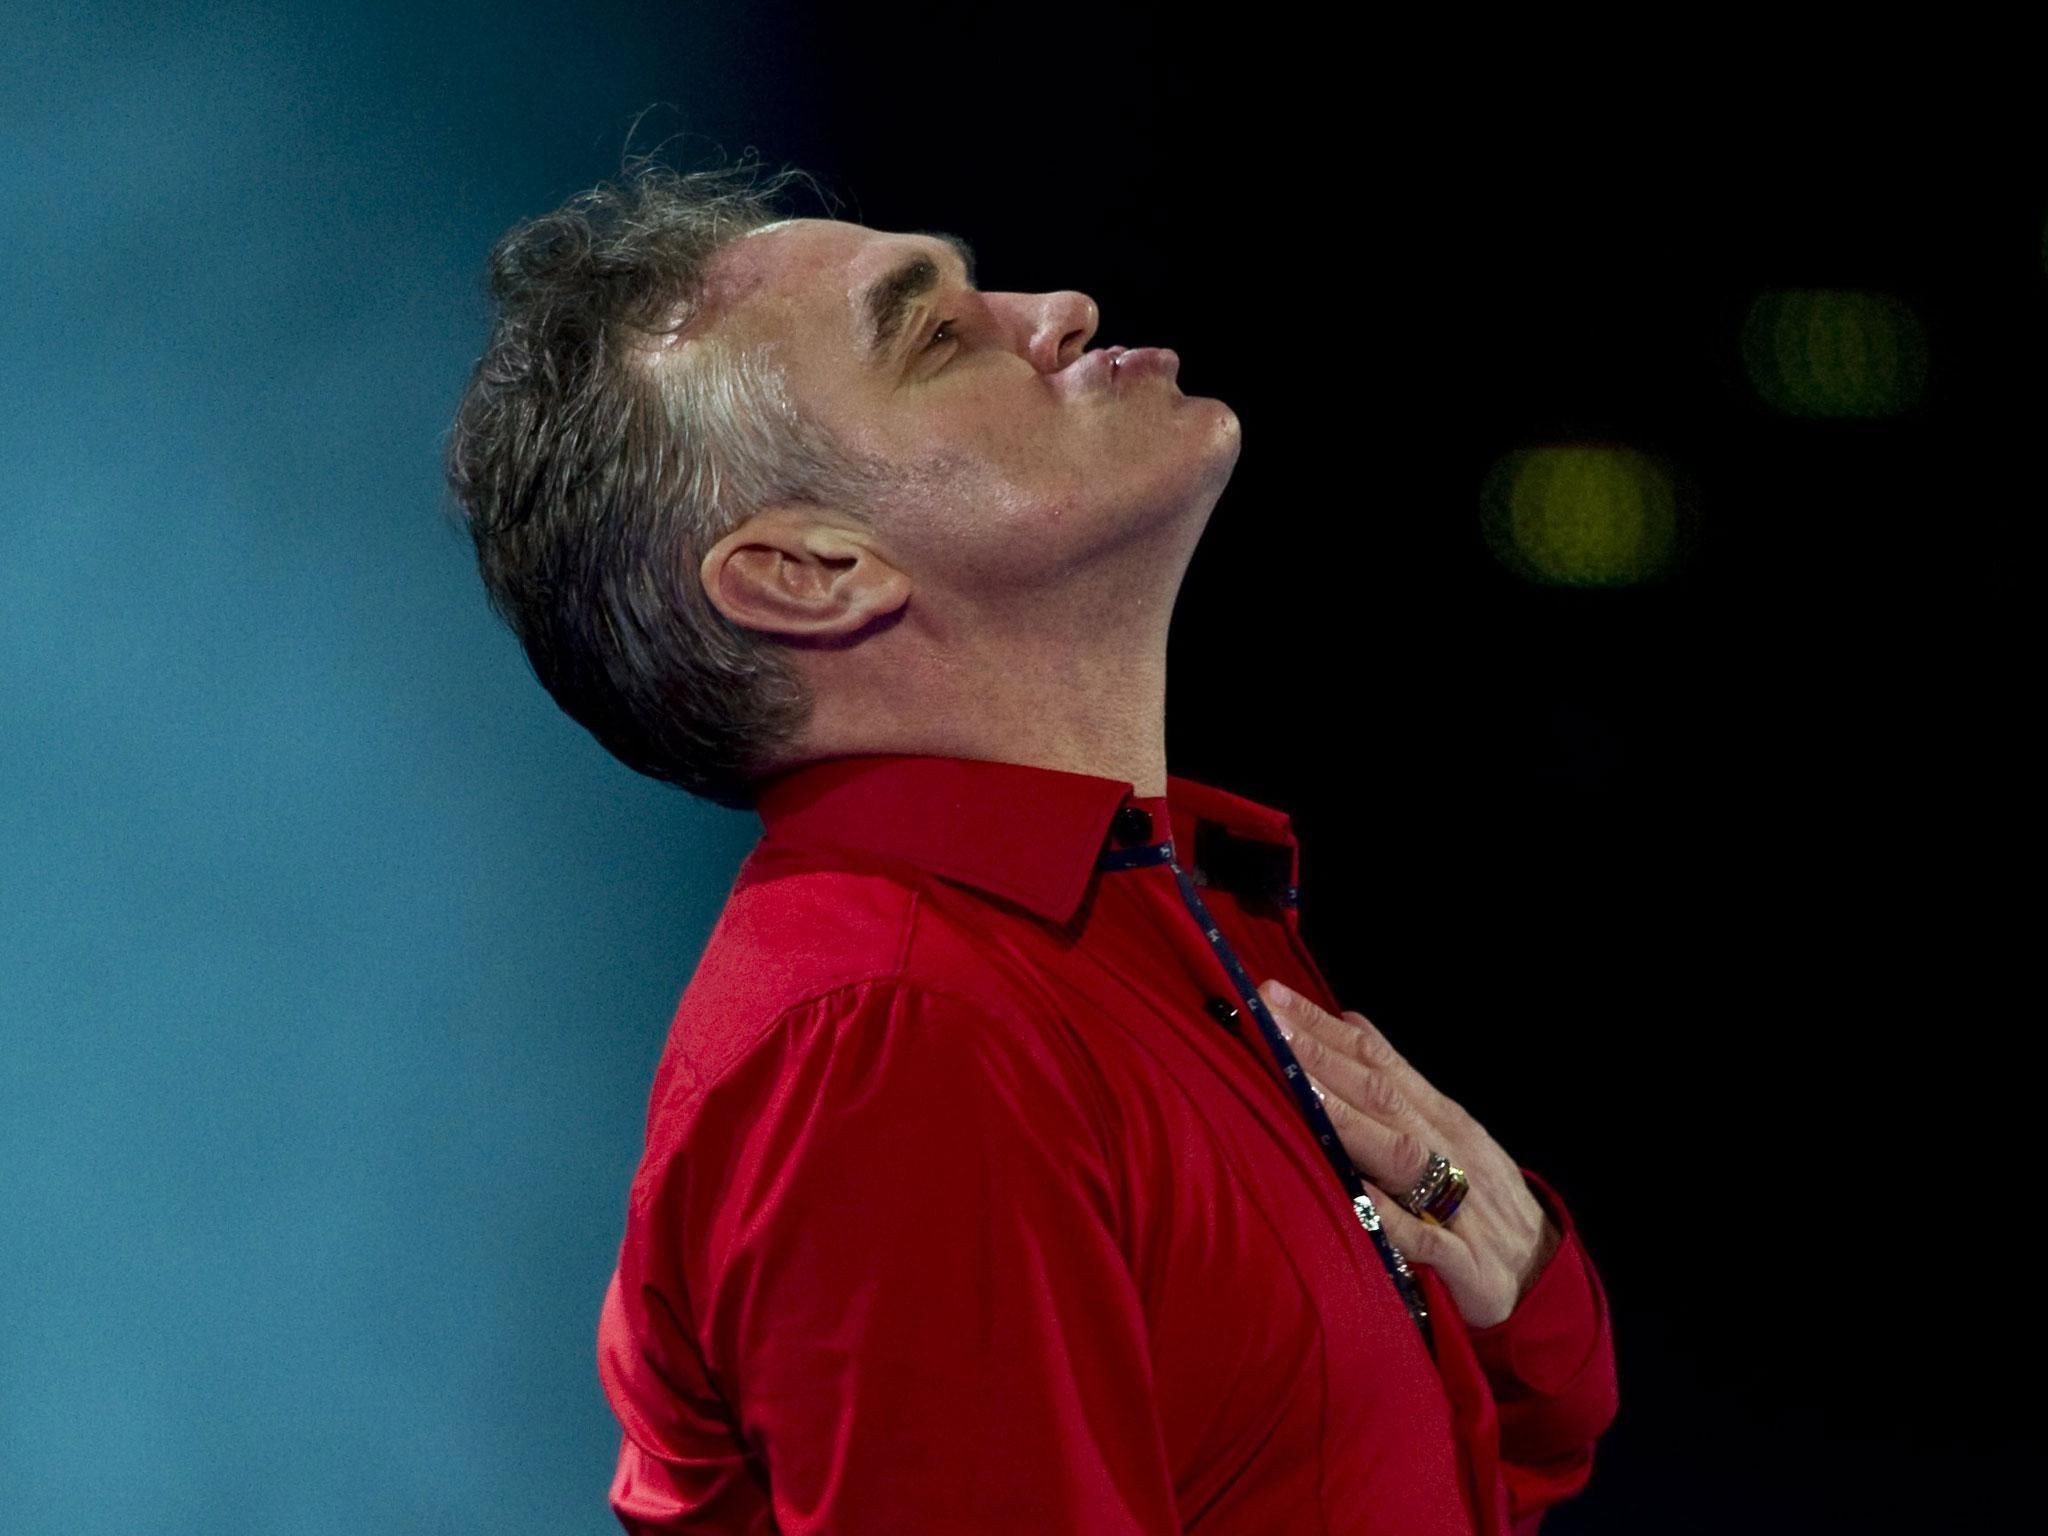 Literary critics, Morrissey didn't write List of the Lost for you, alright?